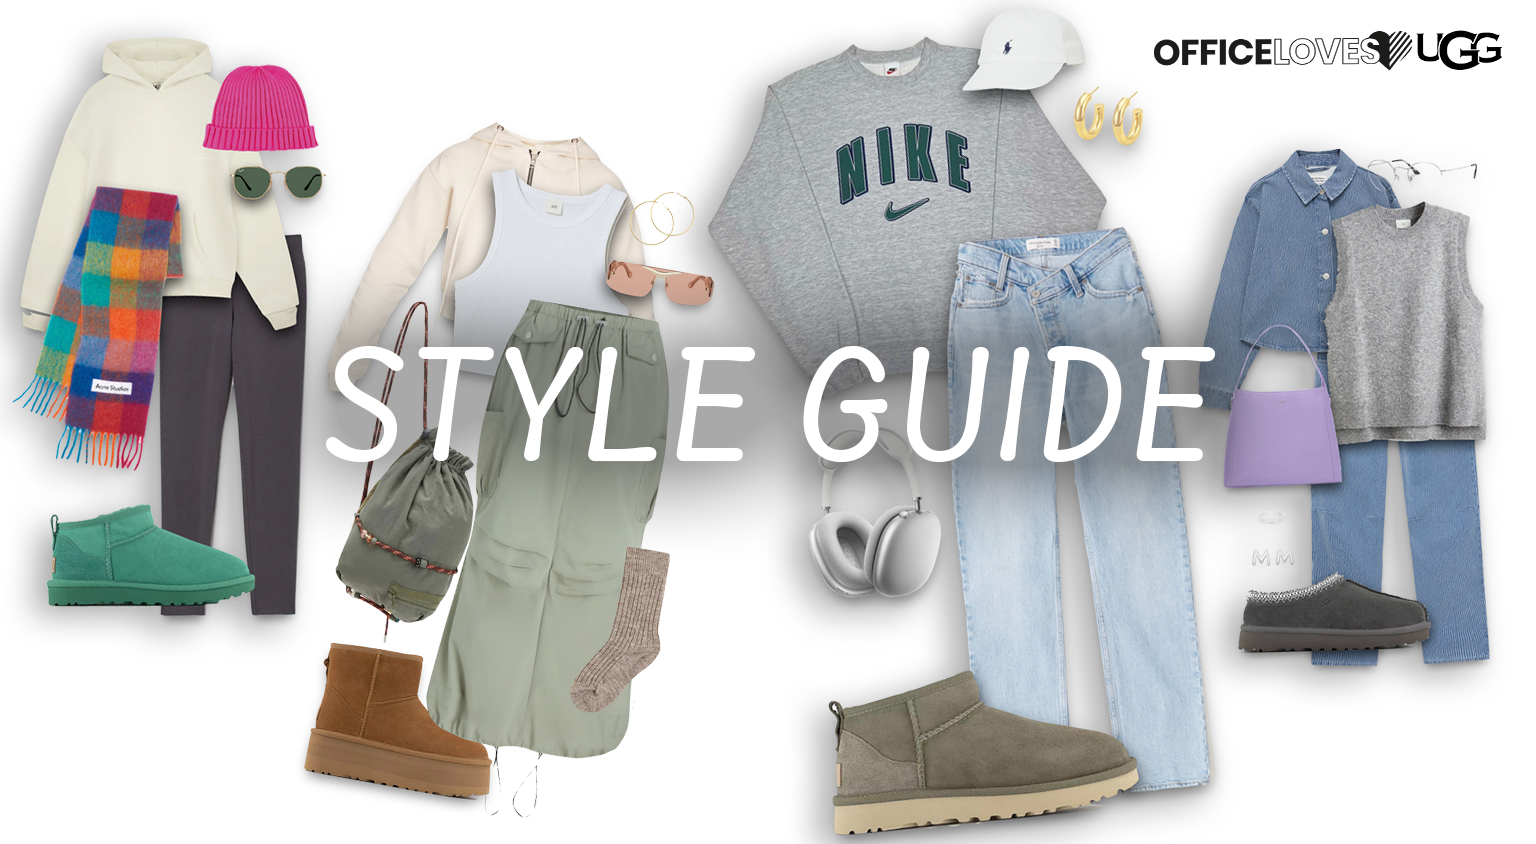 Autumn Style Guide  #officelovesugg - Out of OFFICE